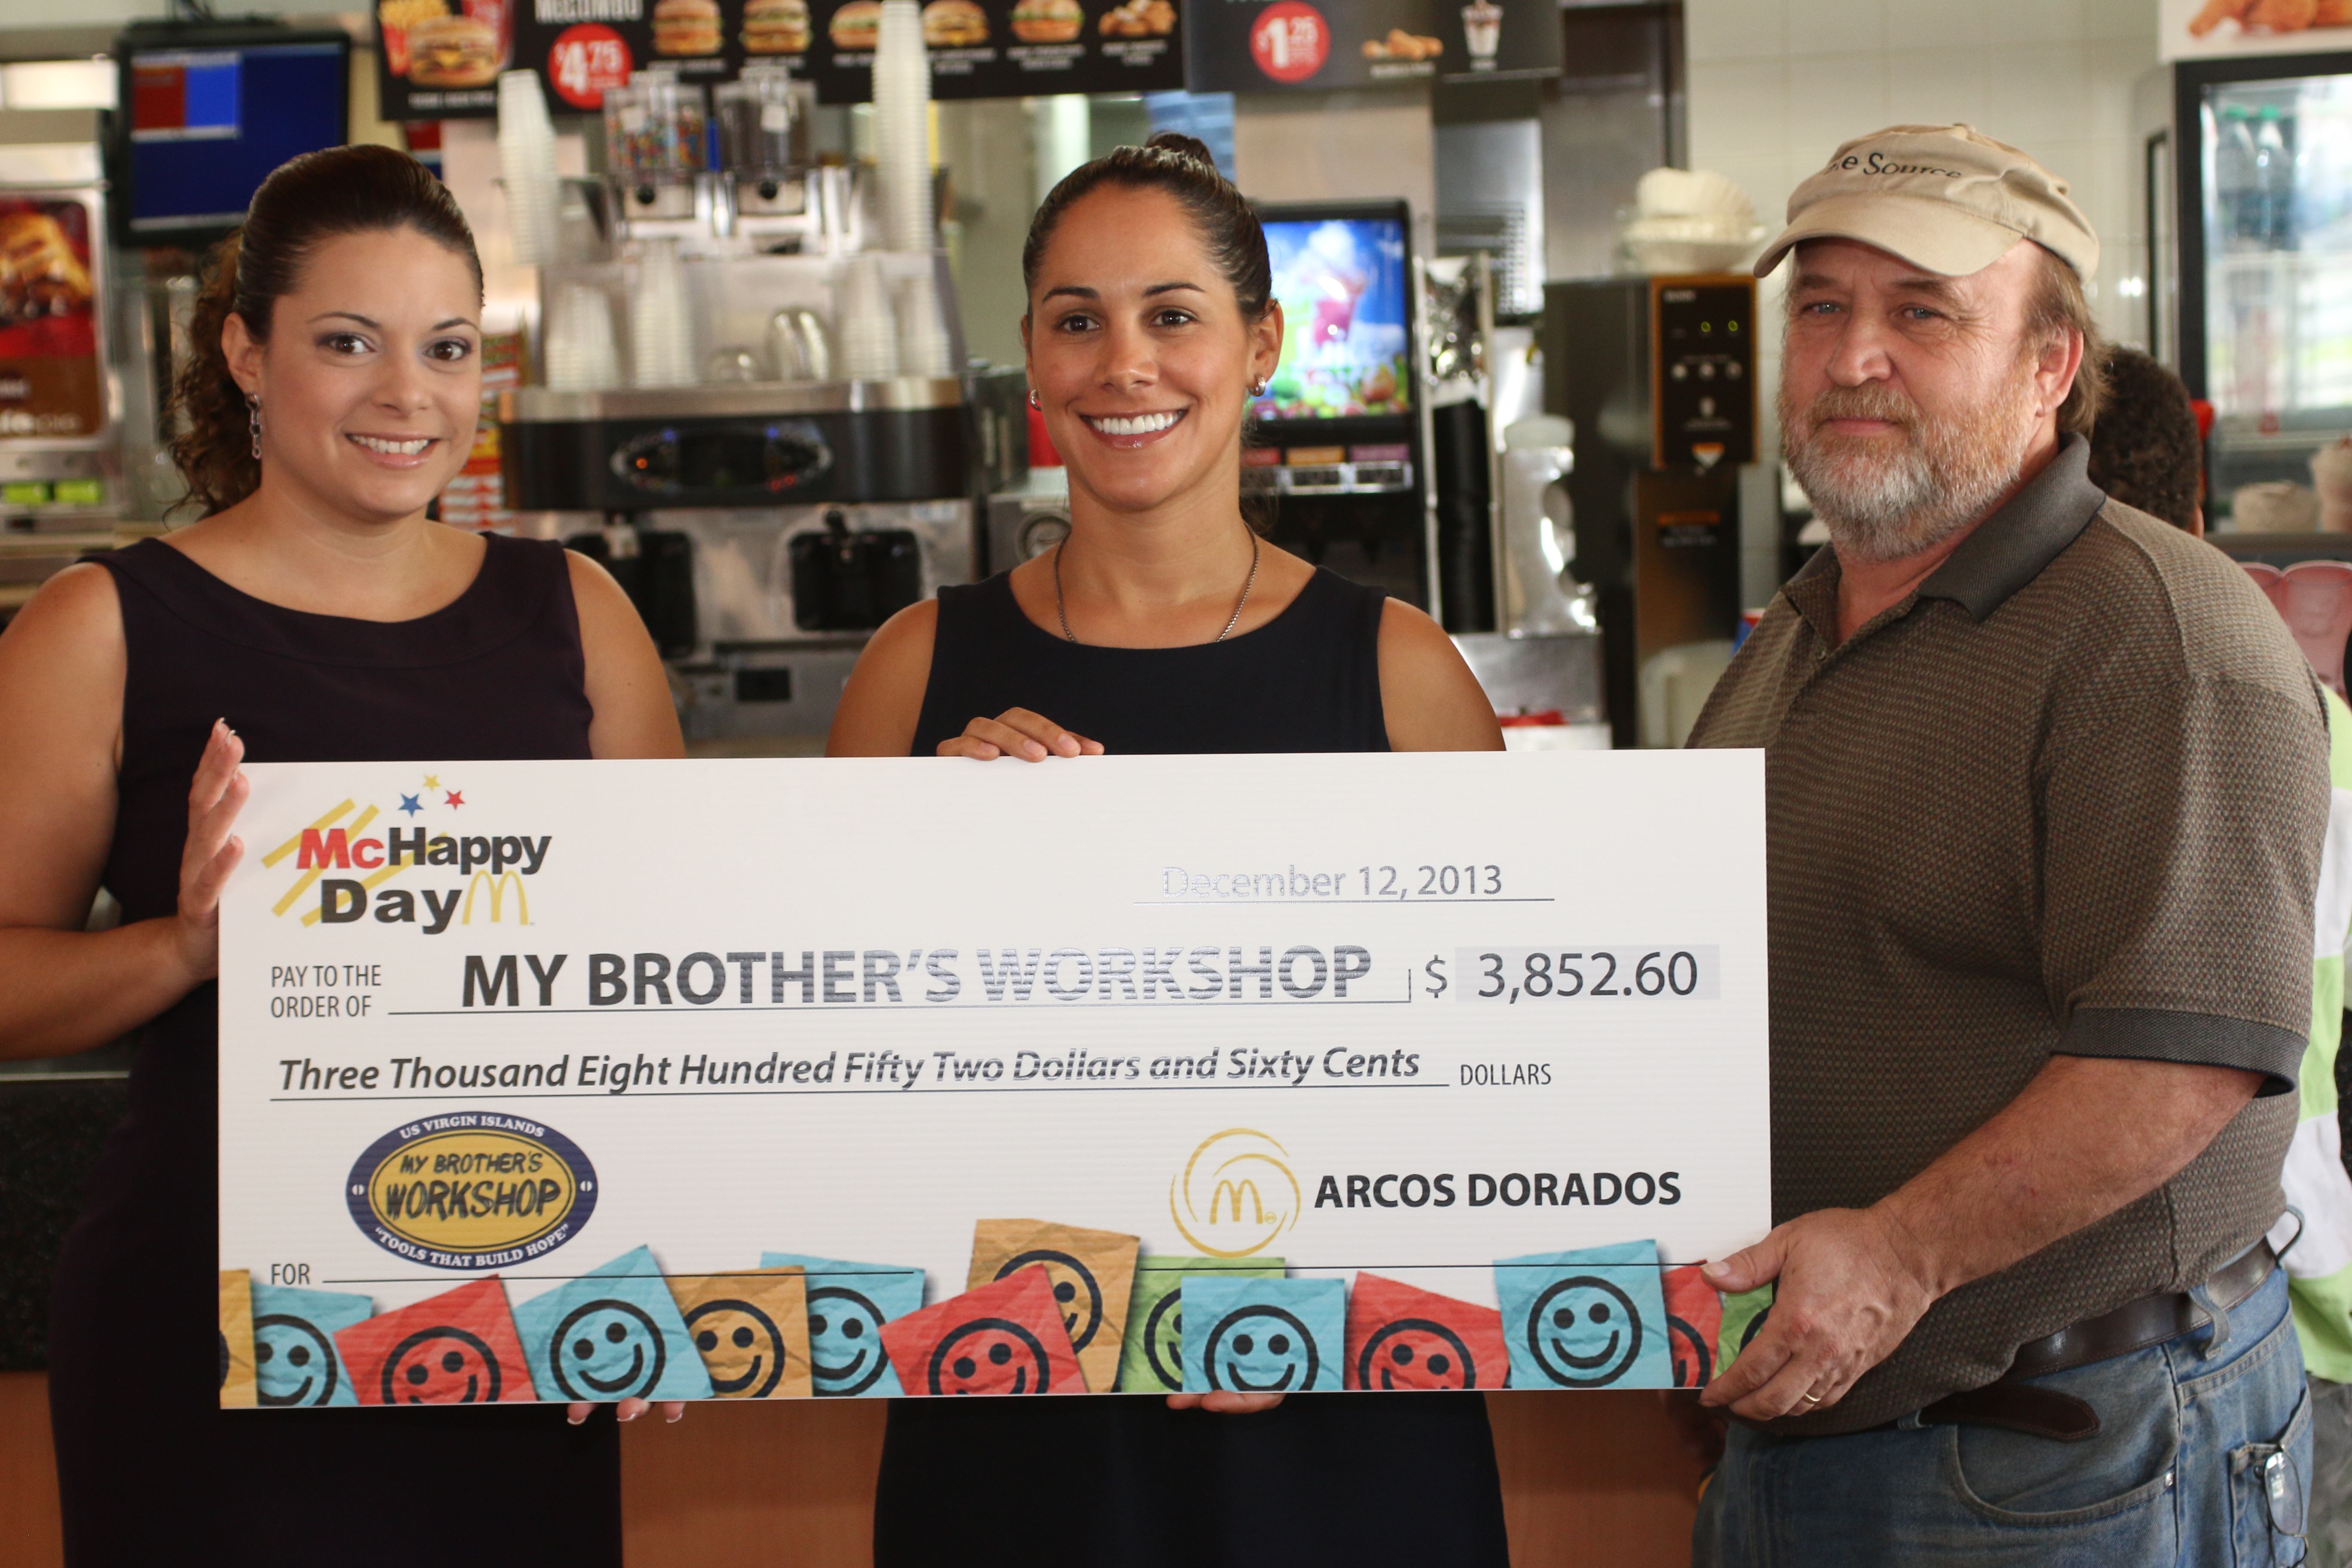 Photo: Mildre Quiles (left) presents Christina Luton and Scott Bradley of My Brother's Workshop with a check from McDonald's for the proceeds raised through the 2013 McHappy Day Campaign.